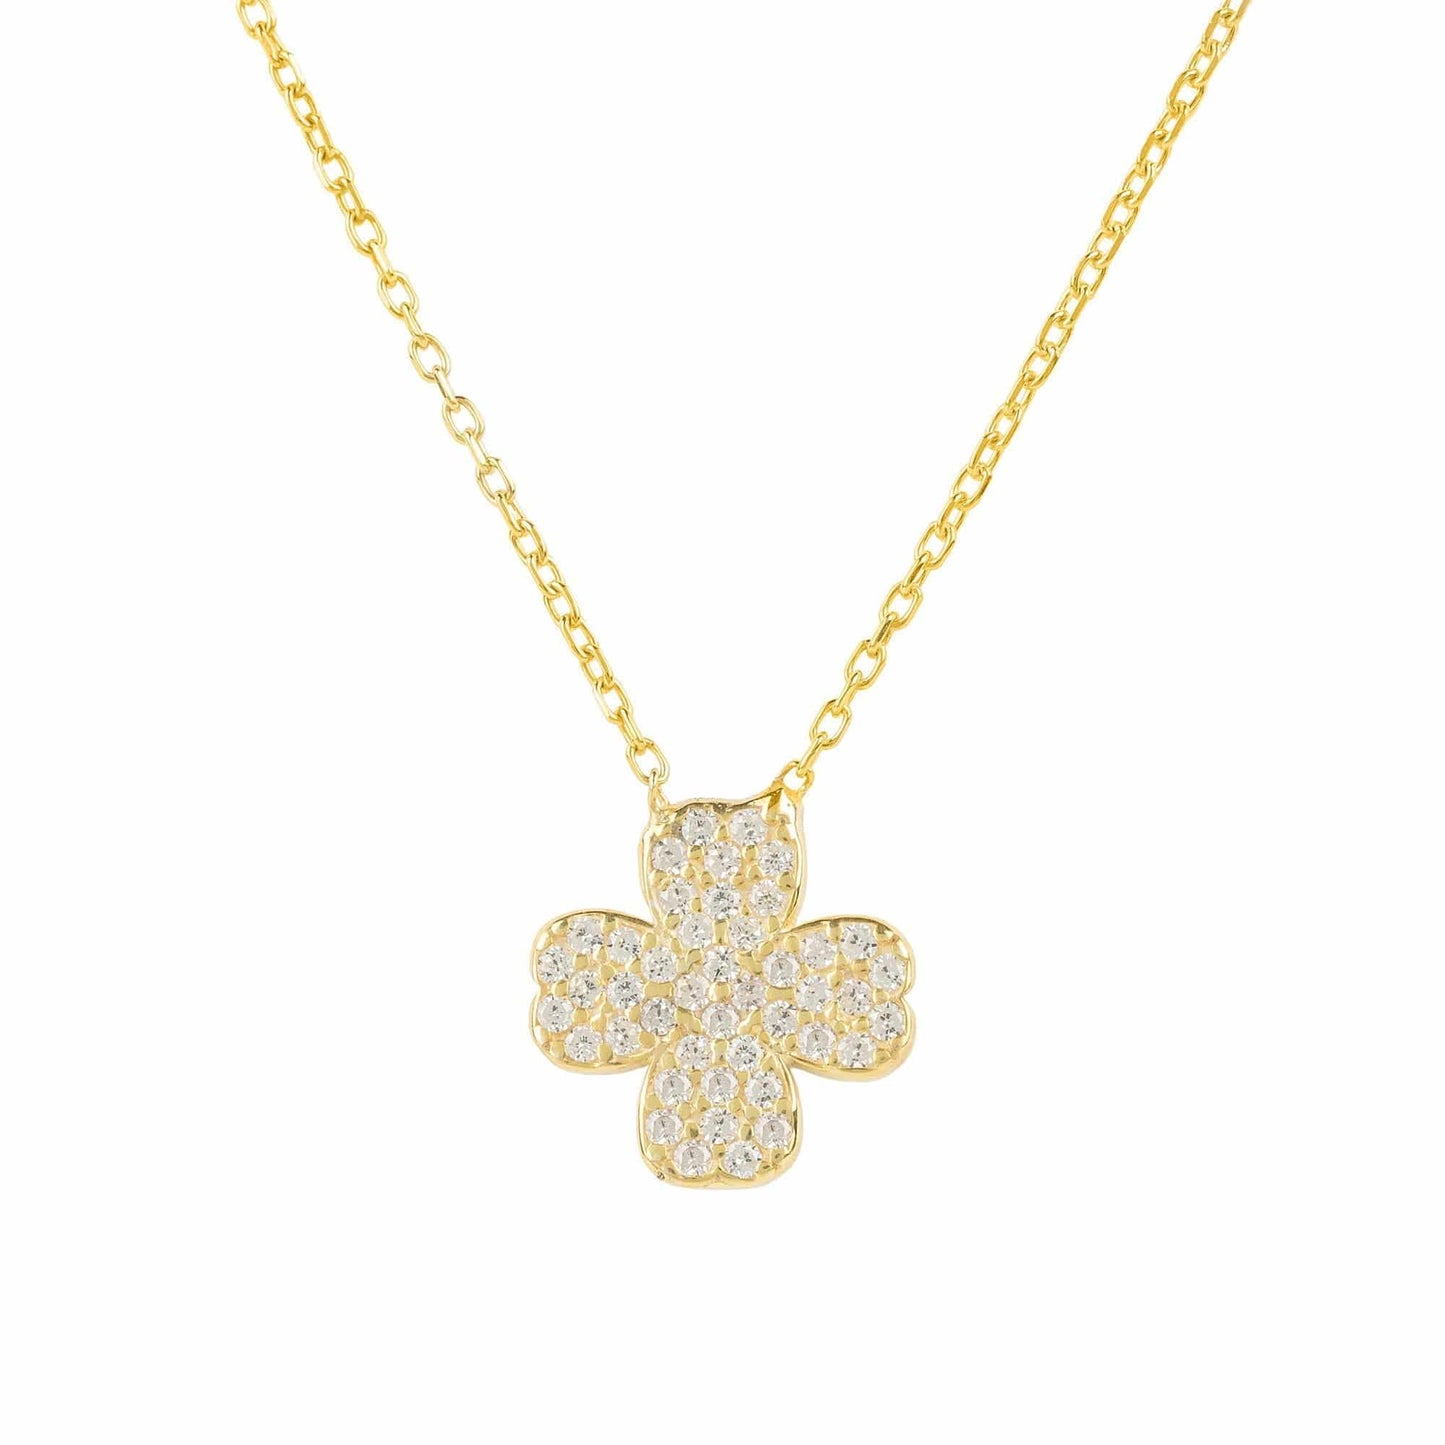 Lucky Four Leaf Clover Necklace - Allure SocietyNecklaces